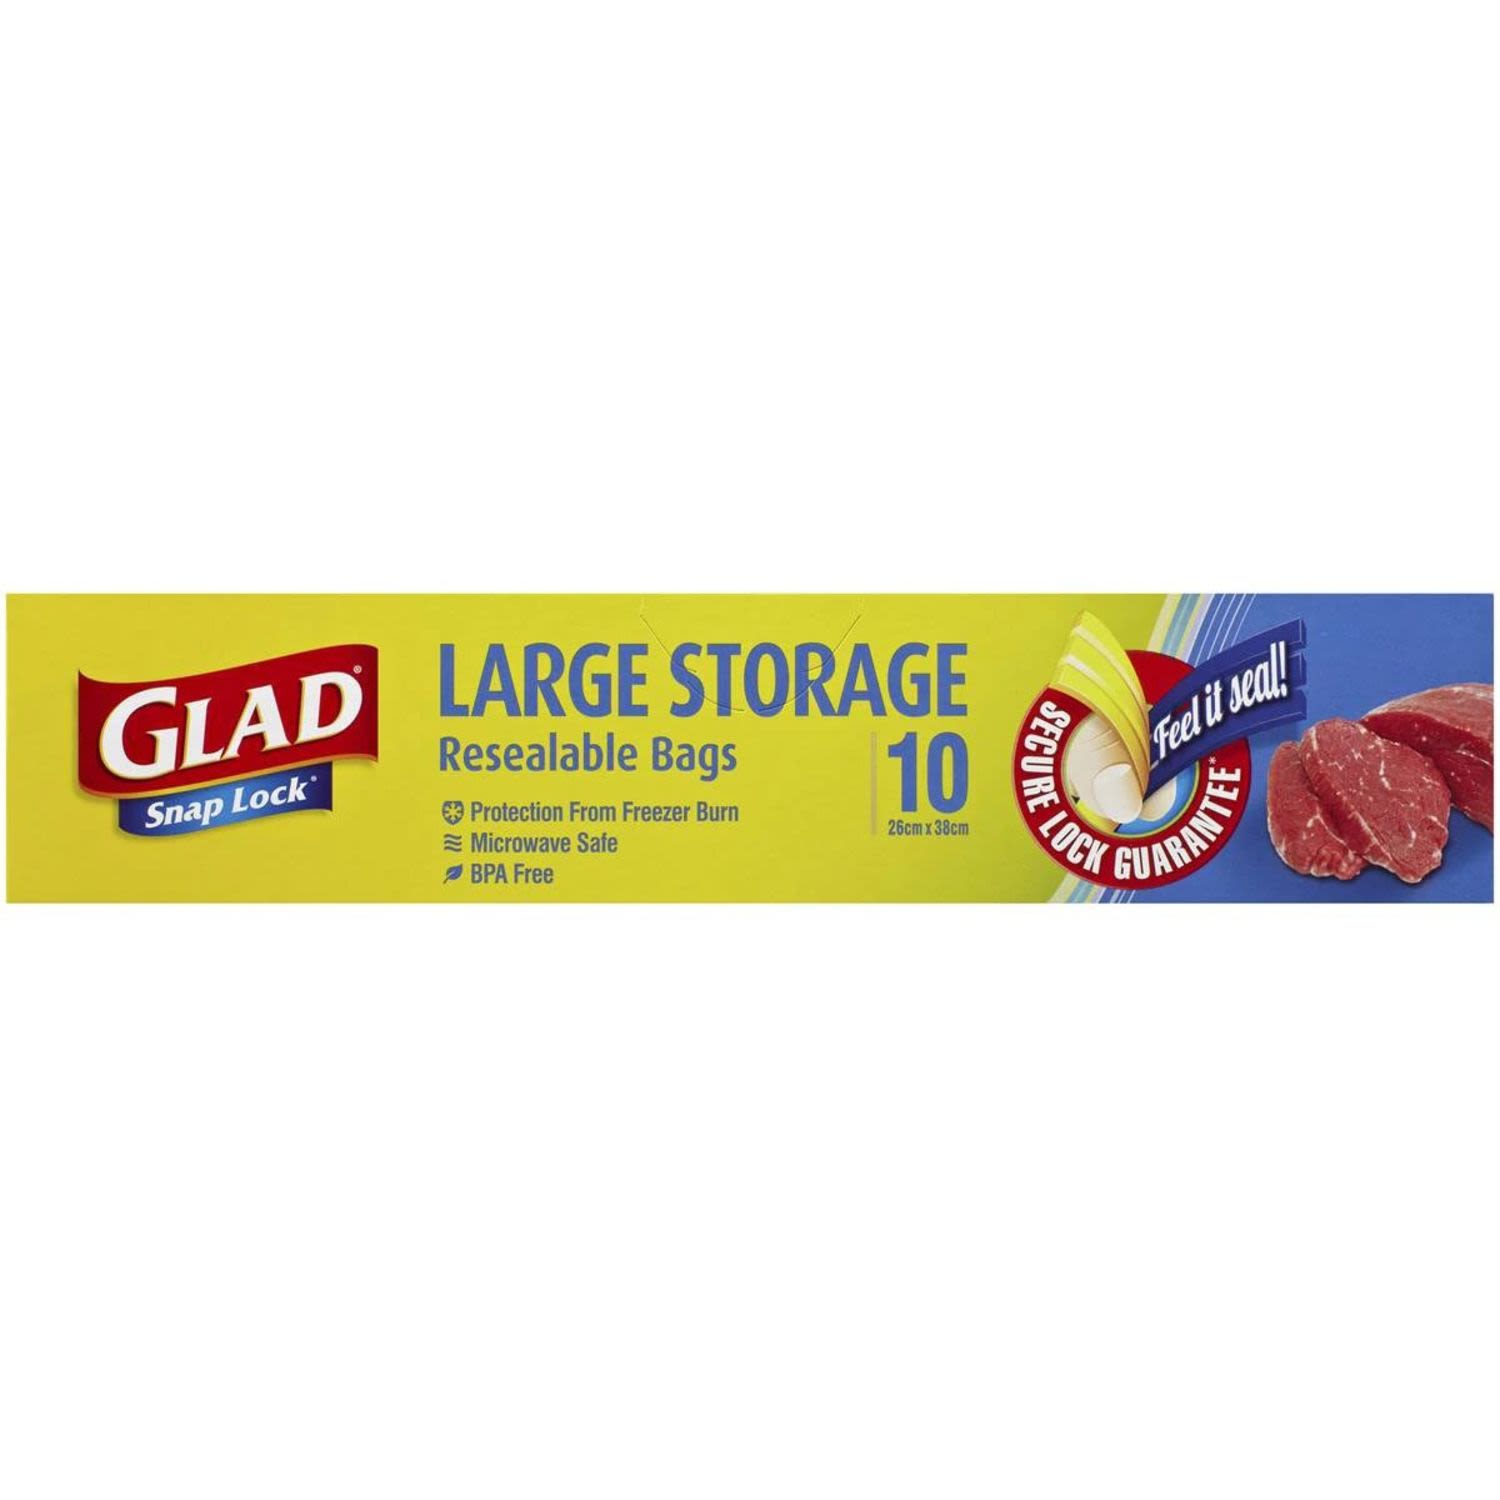 Glad Snaplock Large Storage Resealable Bags, 10 Each